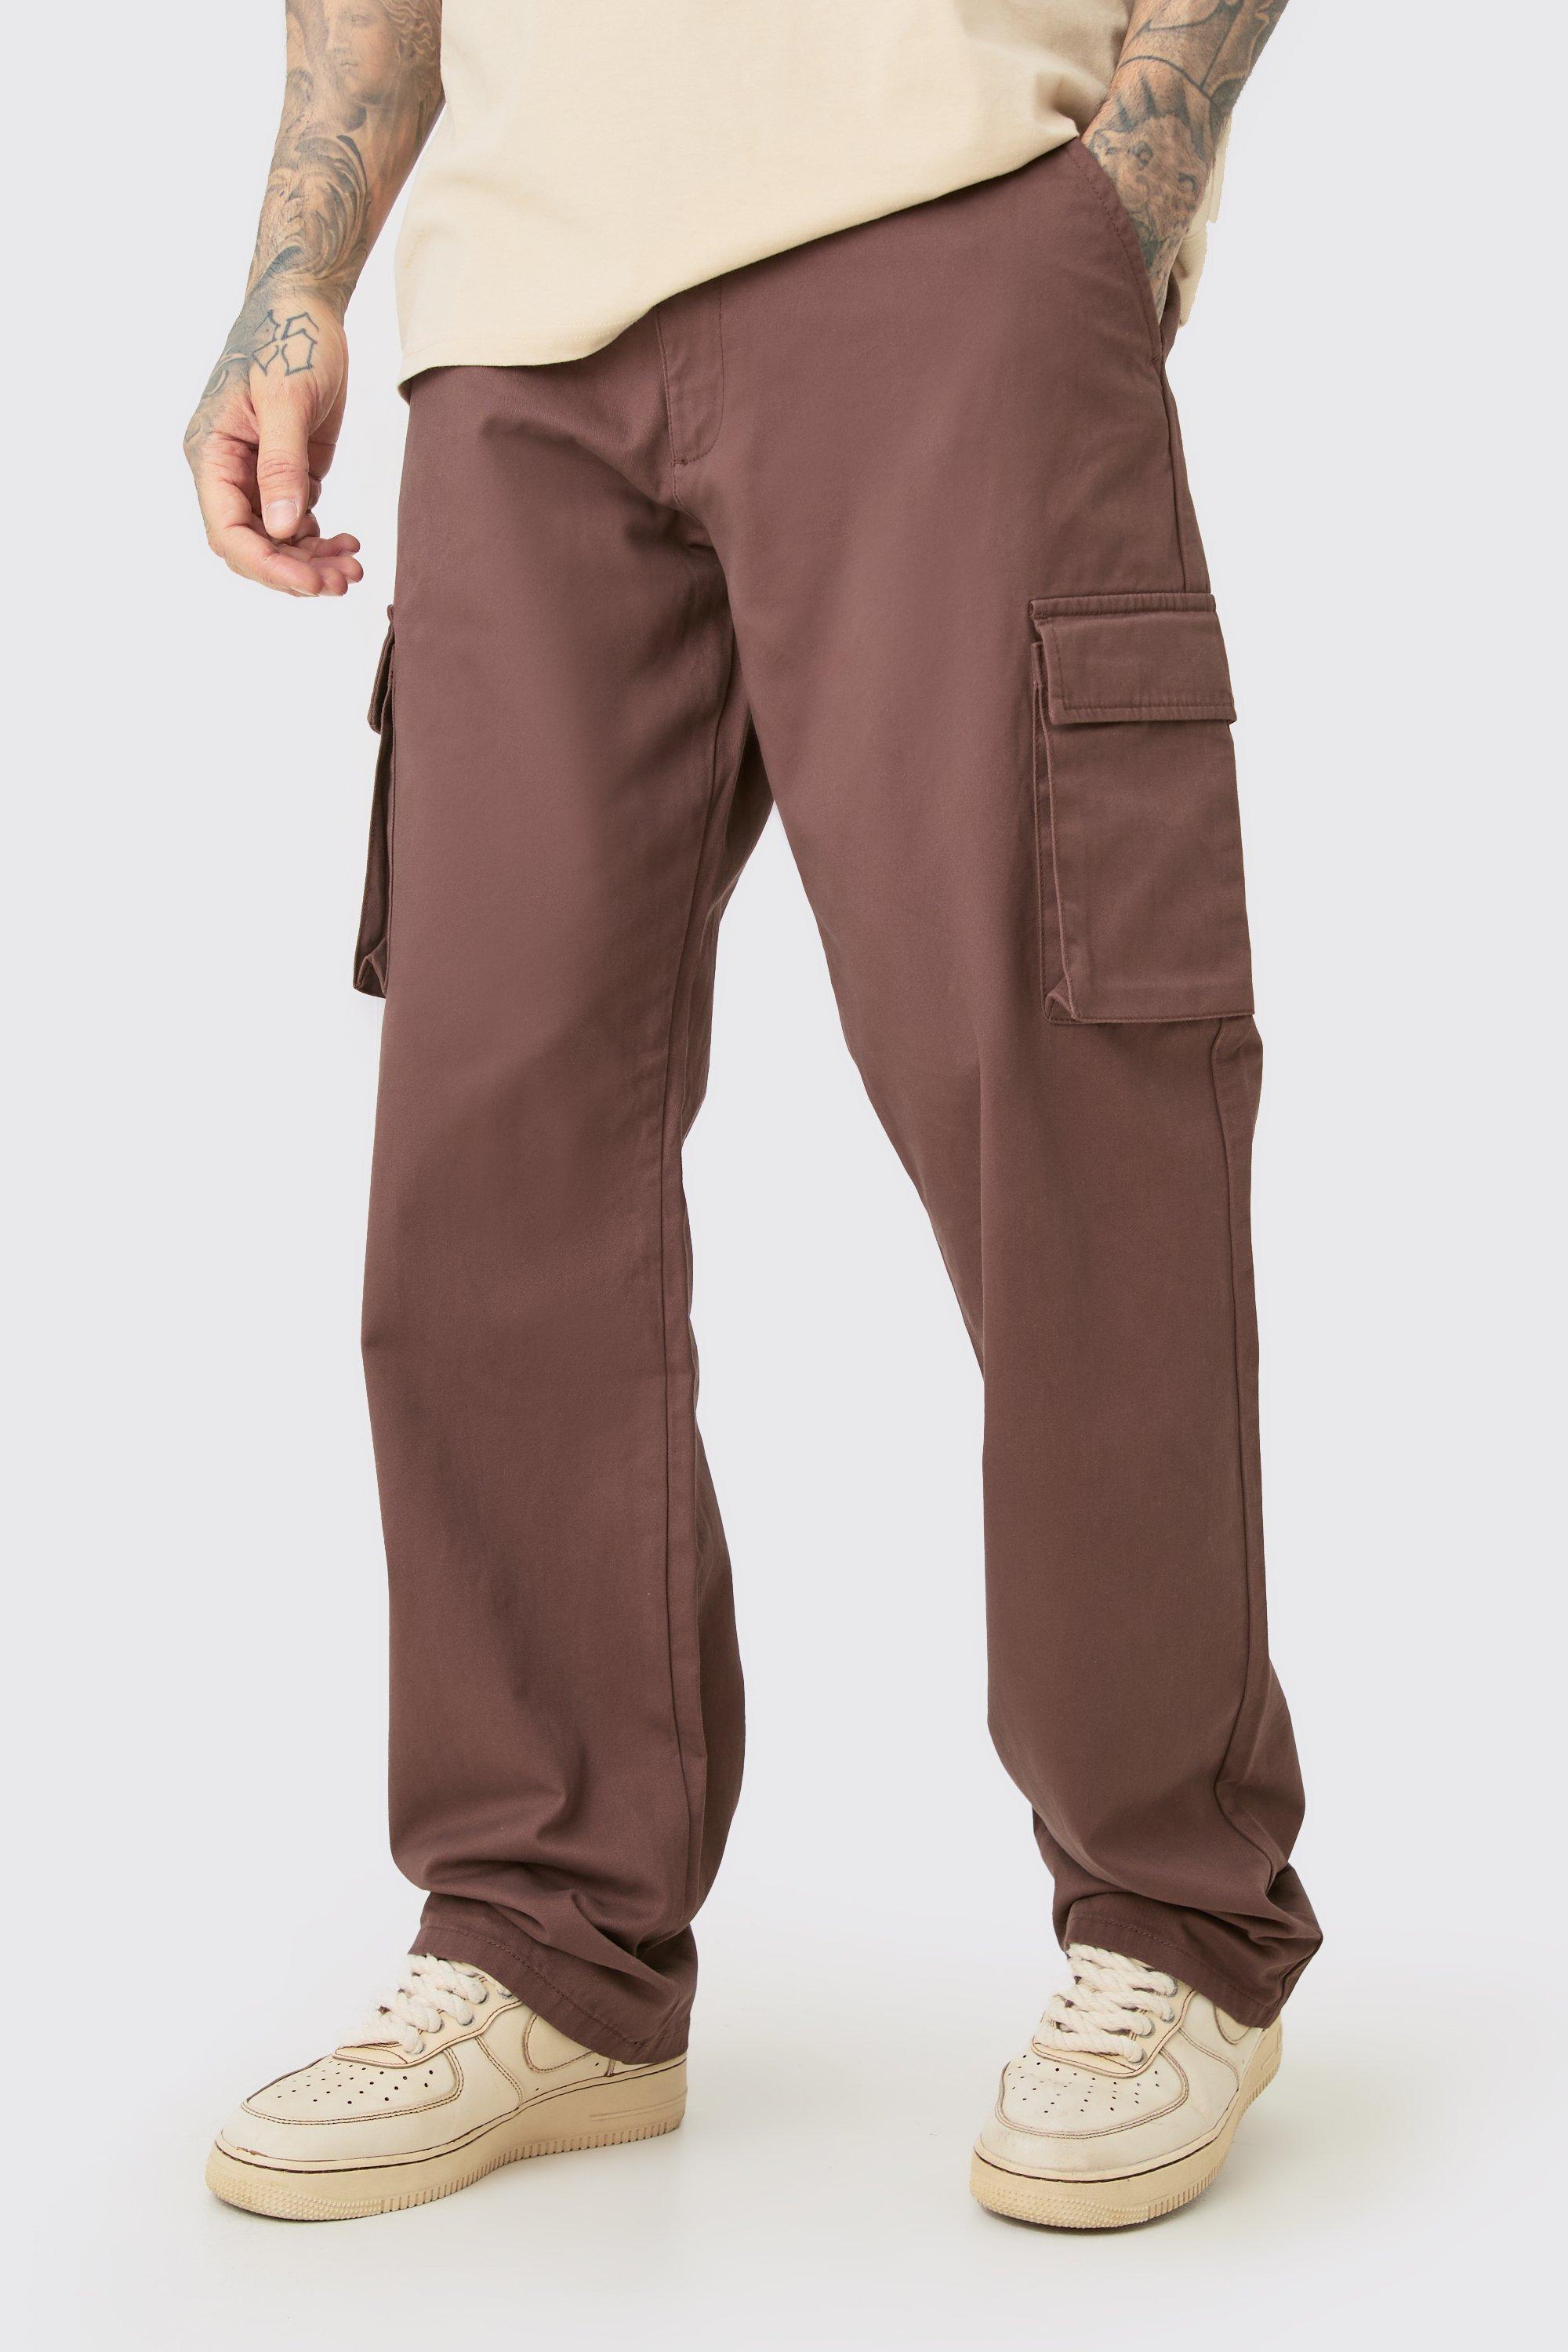 Boohoo Tall Fixed Waist Twill Relaxed Fit Cargo Trouser, Chocolate